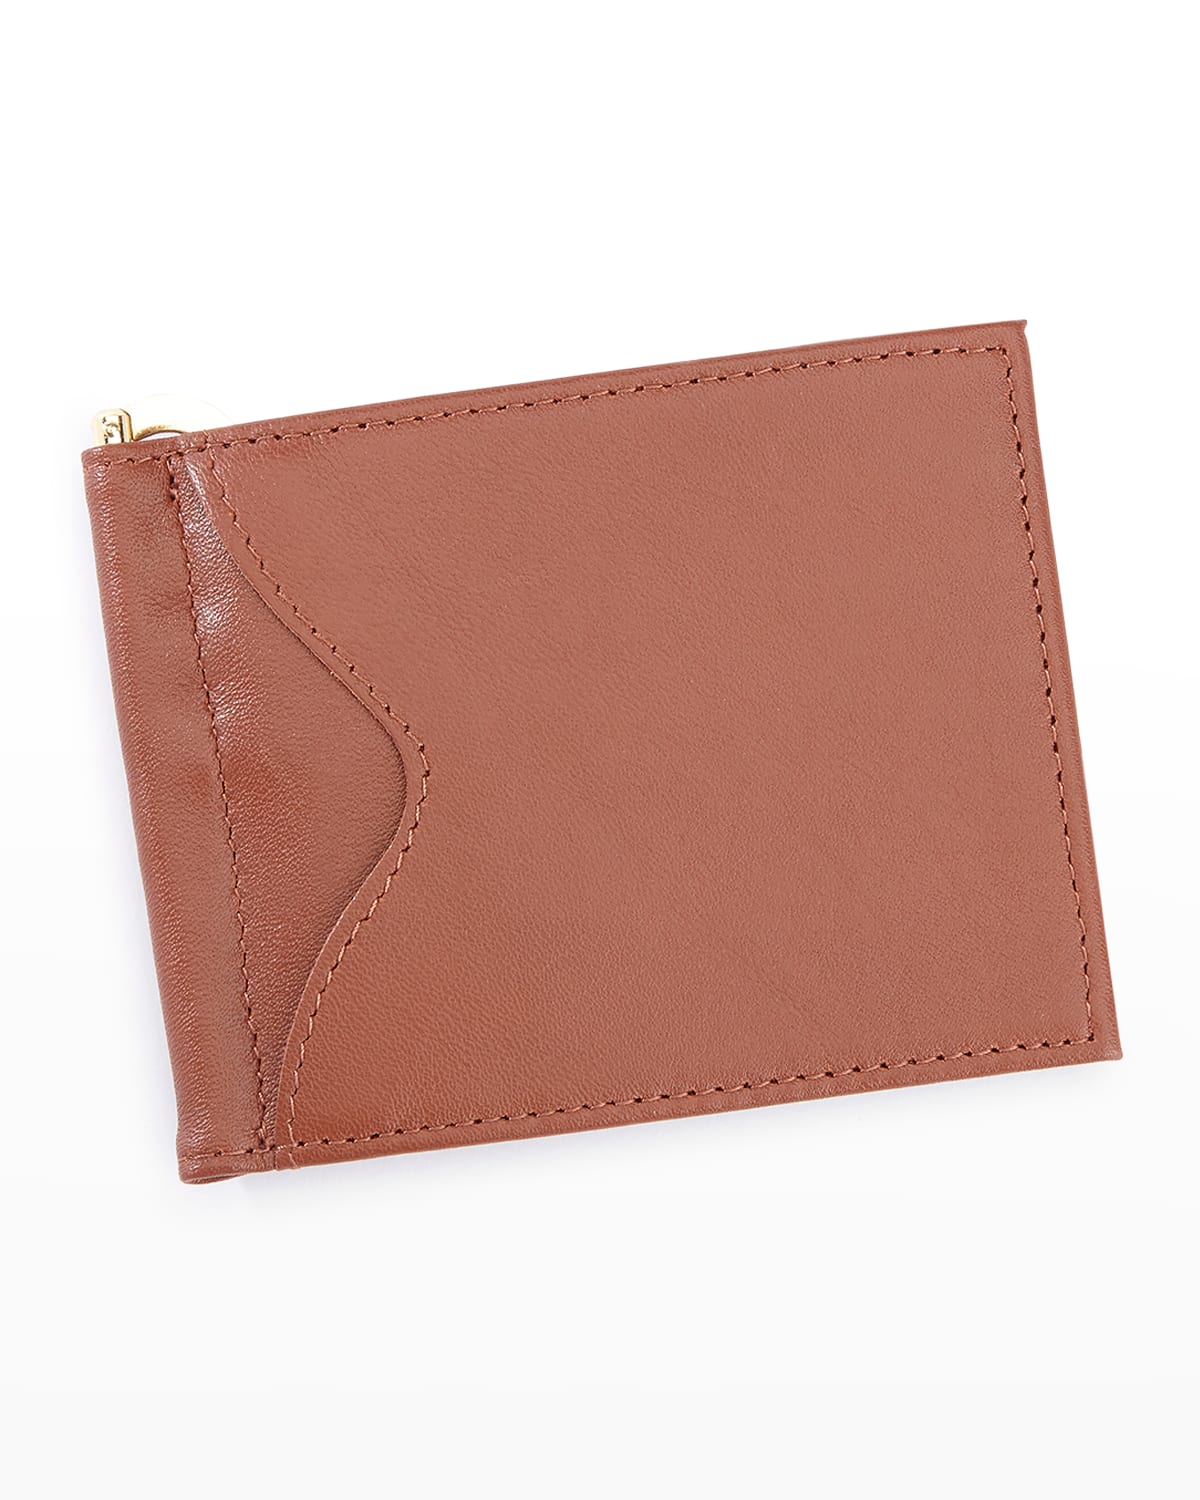 Royce New York Personalized Leather Rfid-blocking Money Clip In Tan